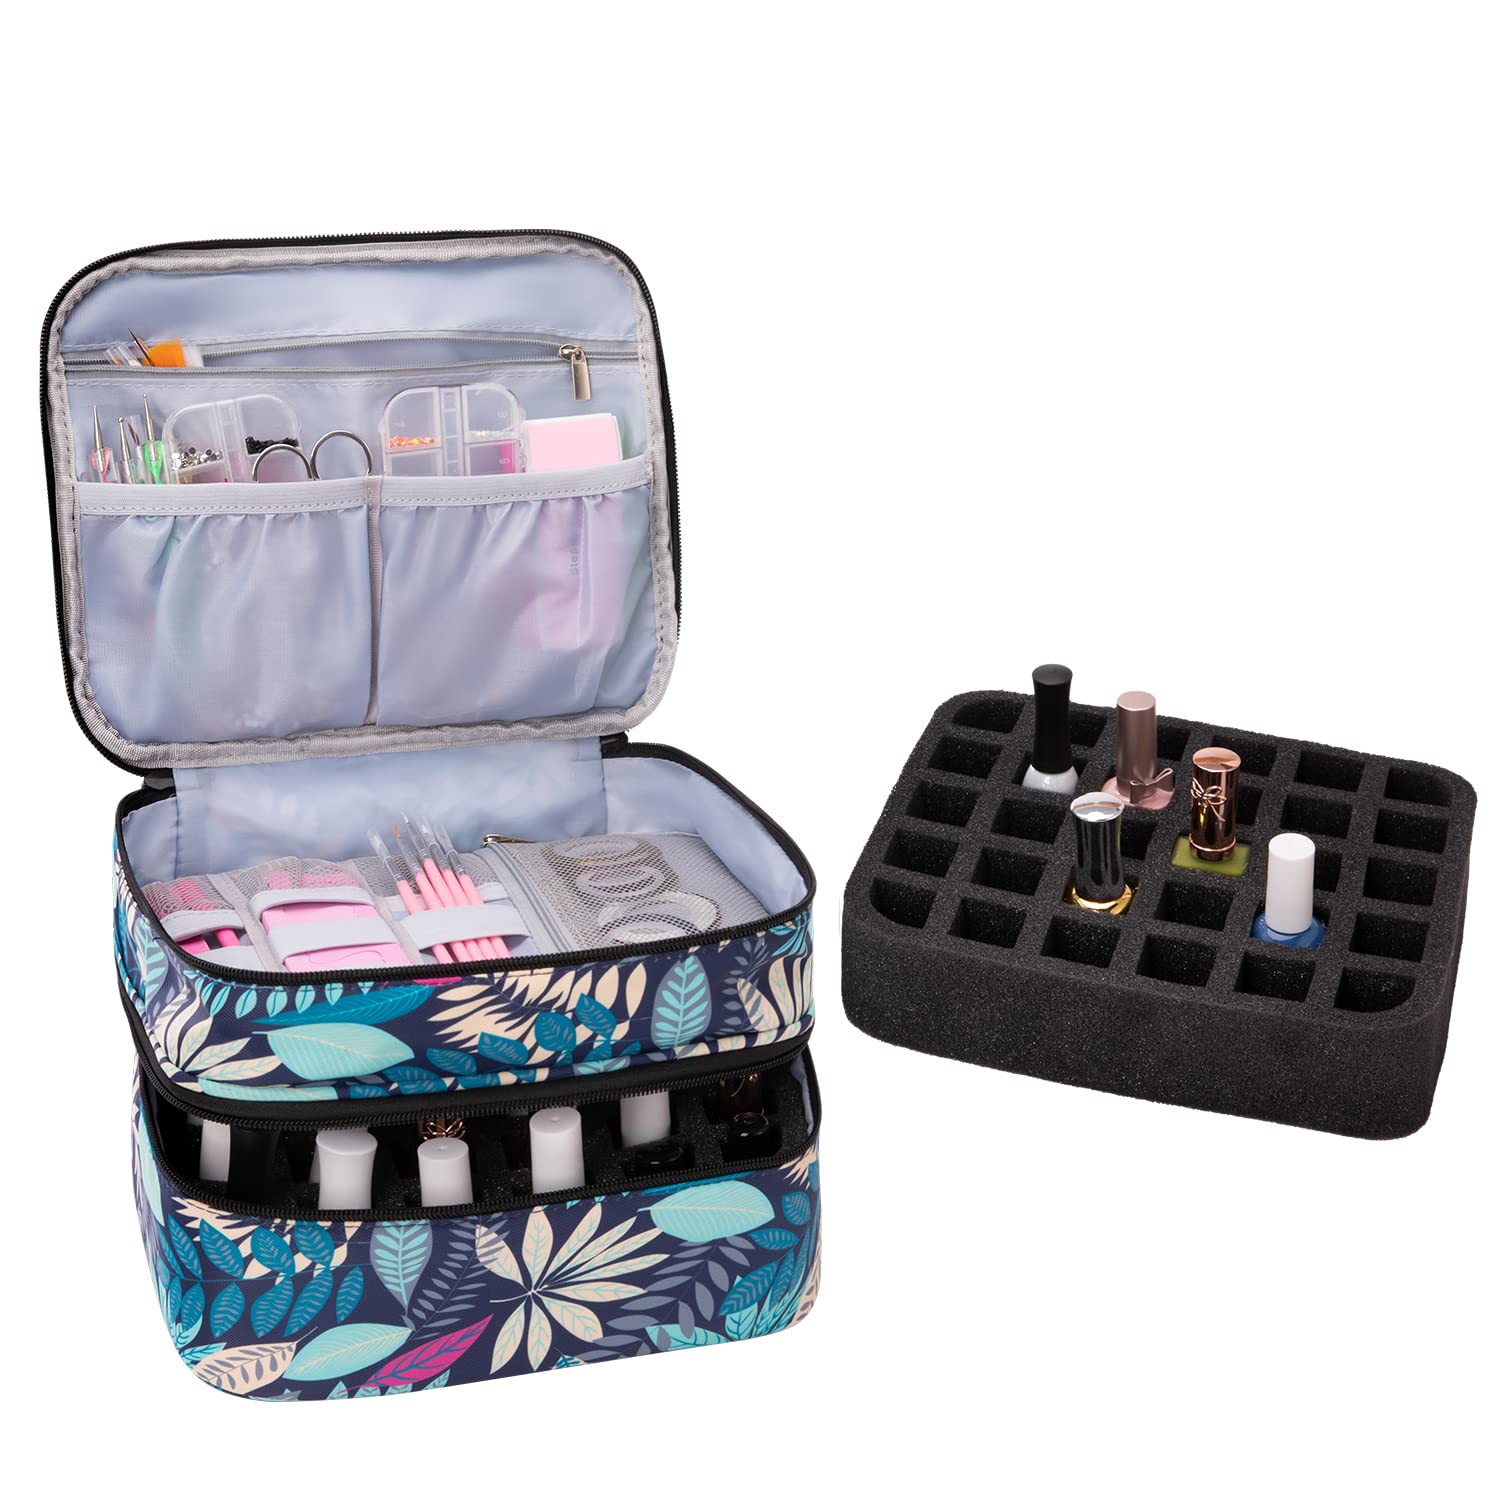 Nail Polish Organizer Bag Travel Nail Polish Carrying Case with Handle  Holds 30 Bottles (15ml) Double Layer Nail Tool Bag for Manicure Tools Pink  